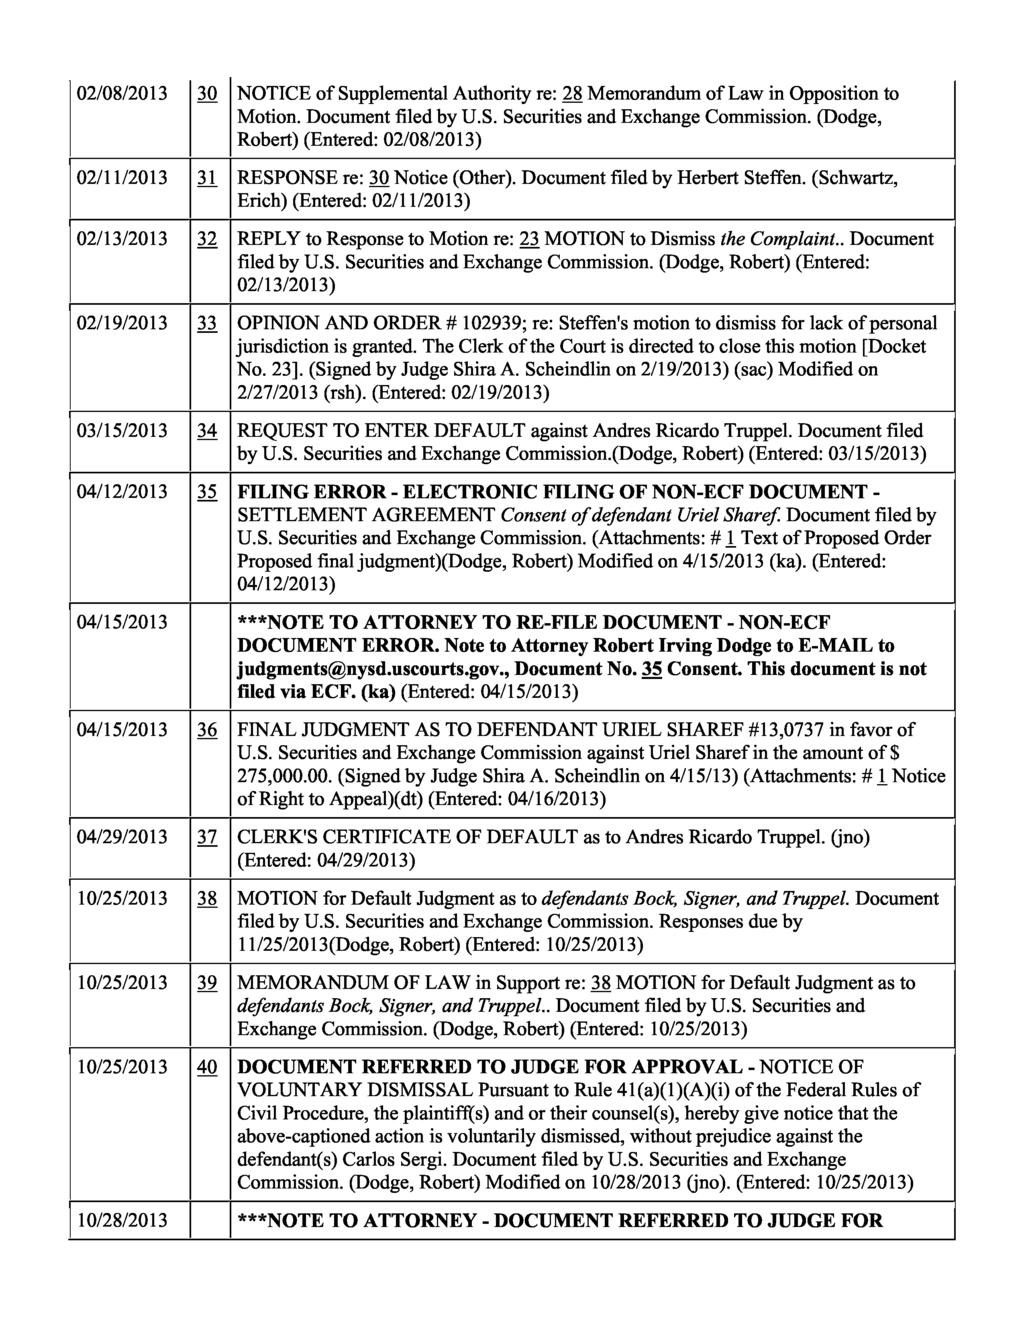 02/08/2013 30 NOTICE of Supplemental Authority re: 28 Memorandum of Law in Opposition to Motion. Document filed by U.S. Securities and Exchange Commission.